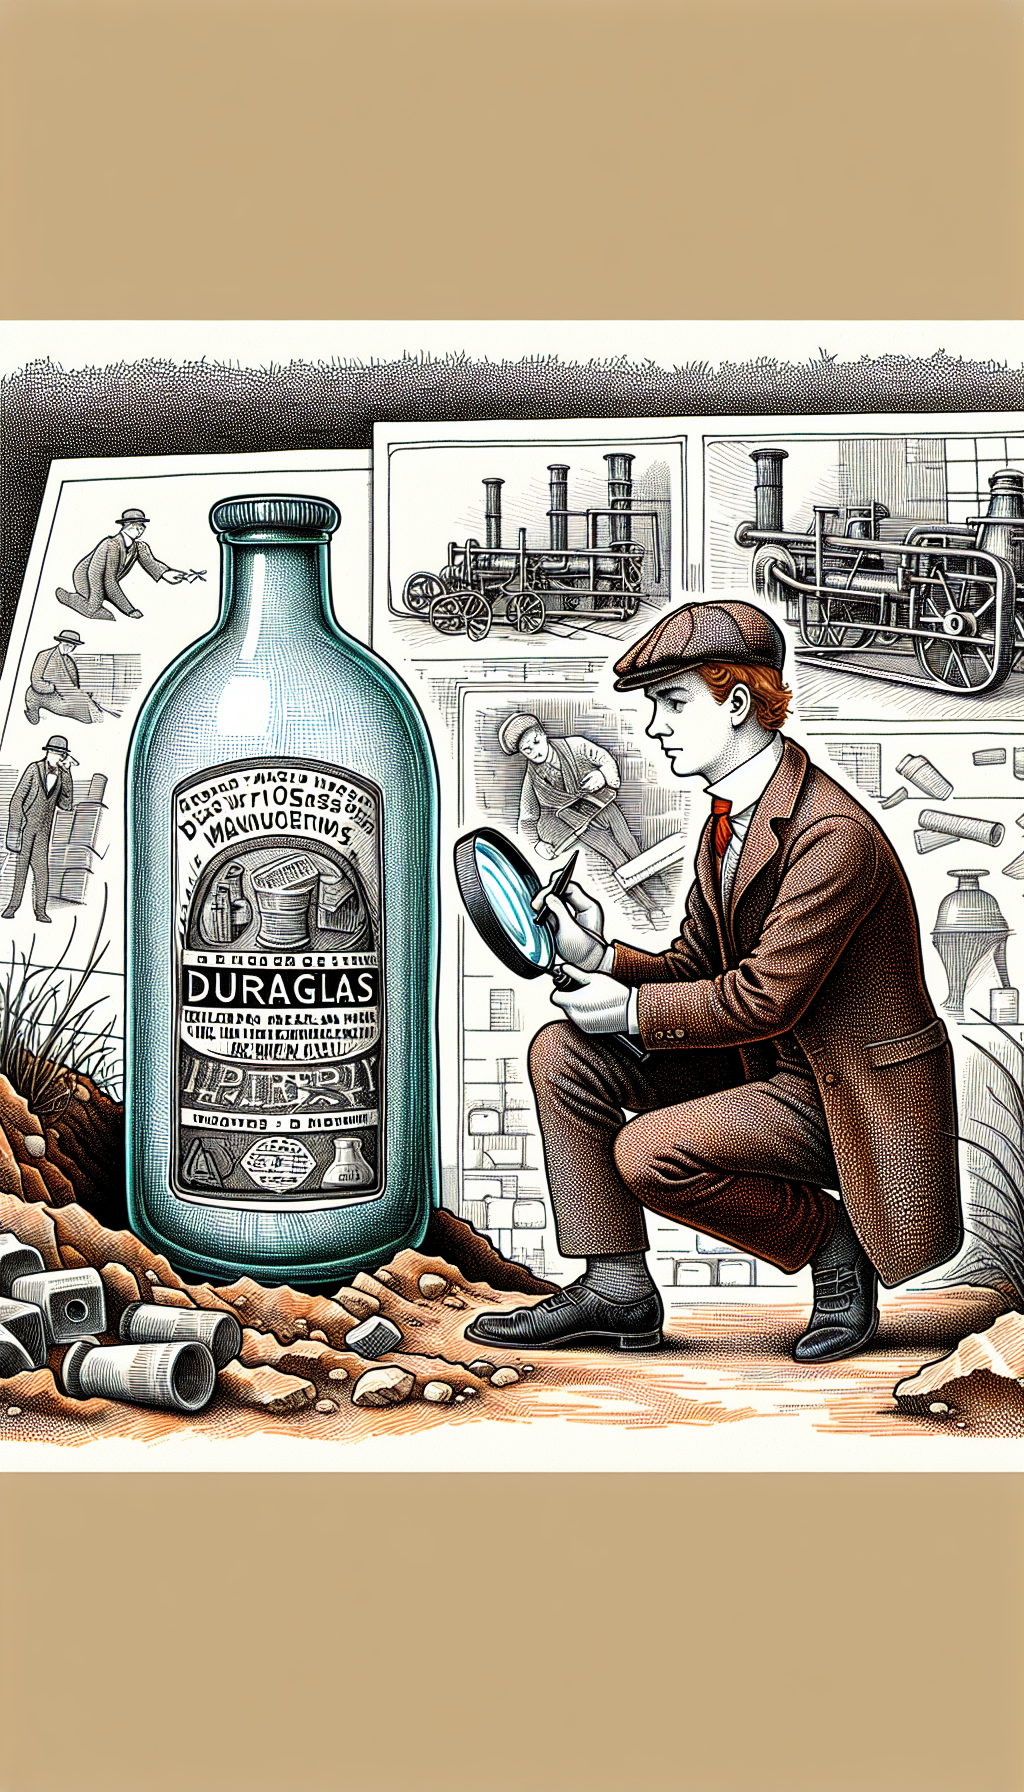 An intricately crosshatched illustration frames an archaeologist delicately excavating around a semi-buried, rare Duraglas bottle, magnifying glass in hand, revealing the manufacturer's marks and various mold seams. Splashes of watercolor hint at the bottle's age and rarity, while line art sketches depict the vintage manufacturing tools subtly in the background, symbolizing the journey from creation to discovery.